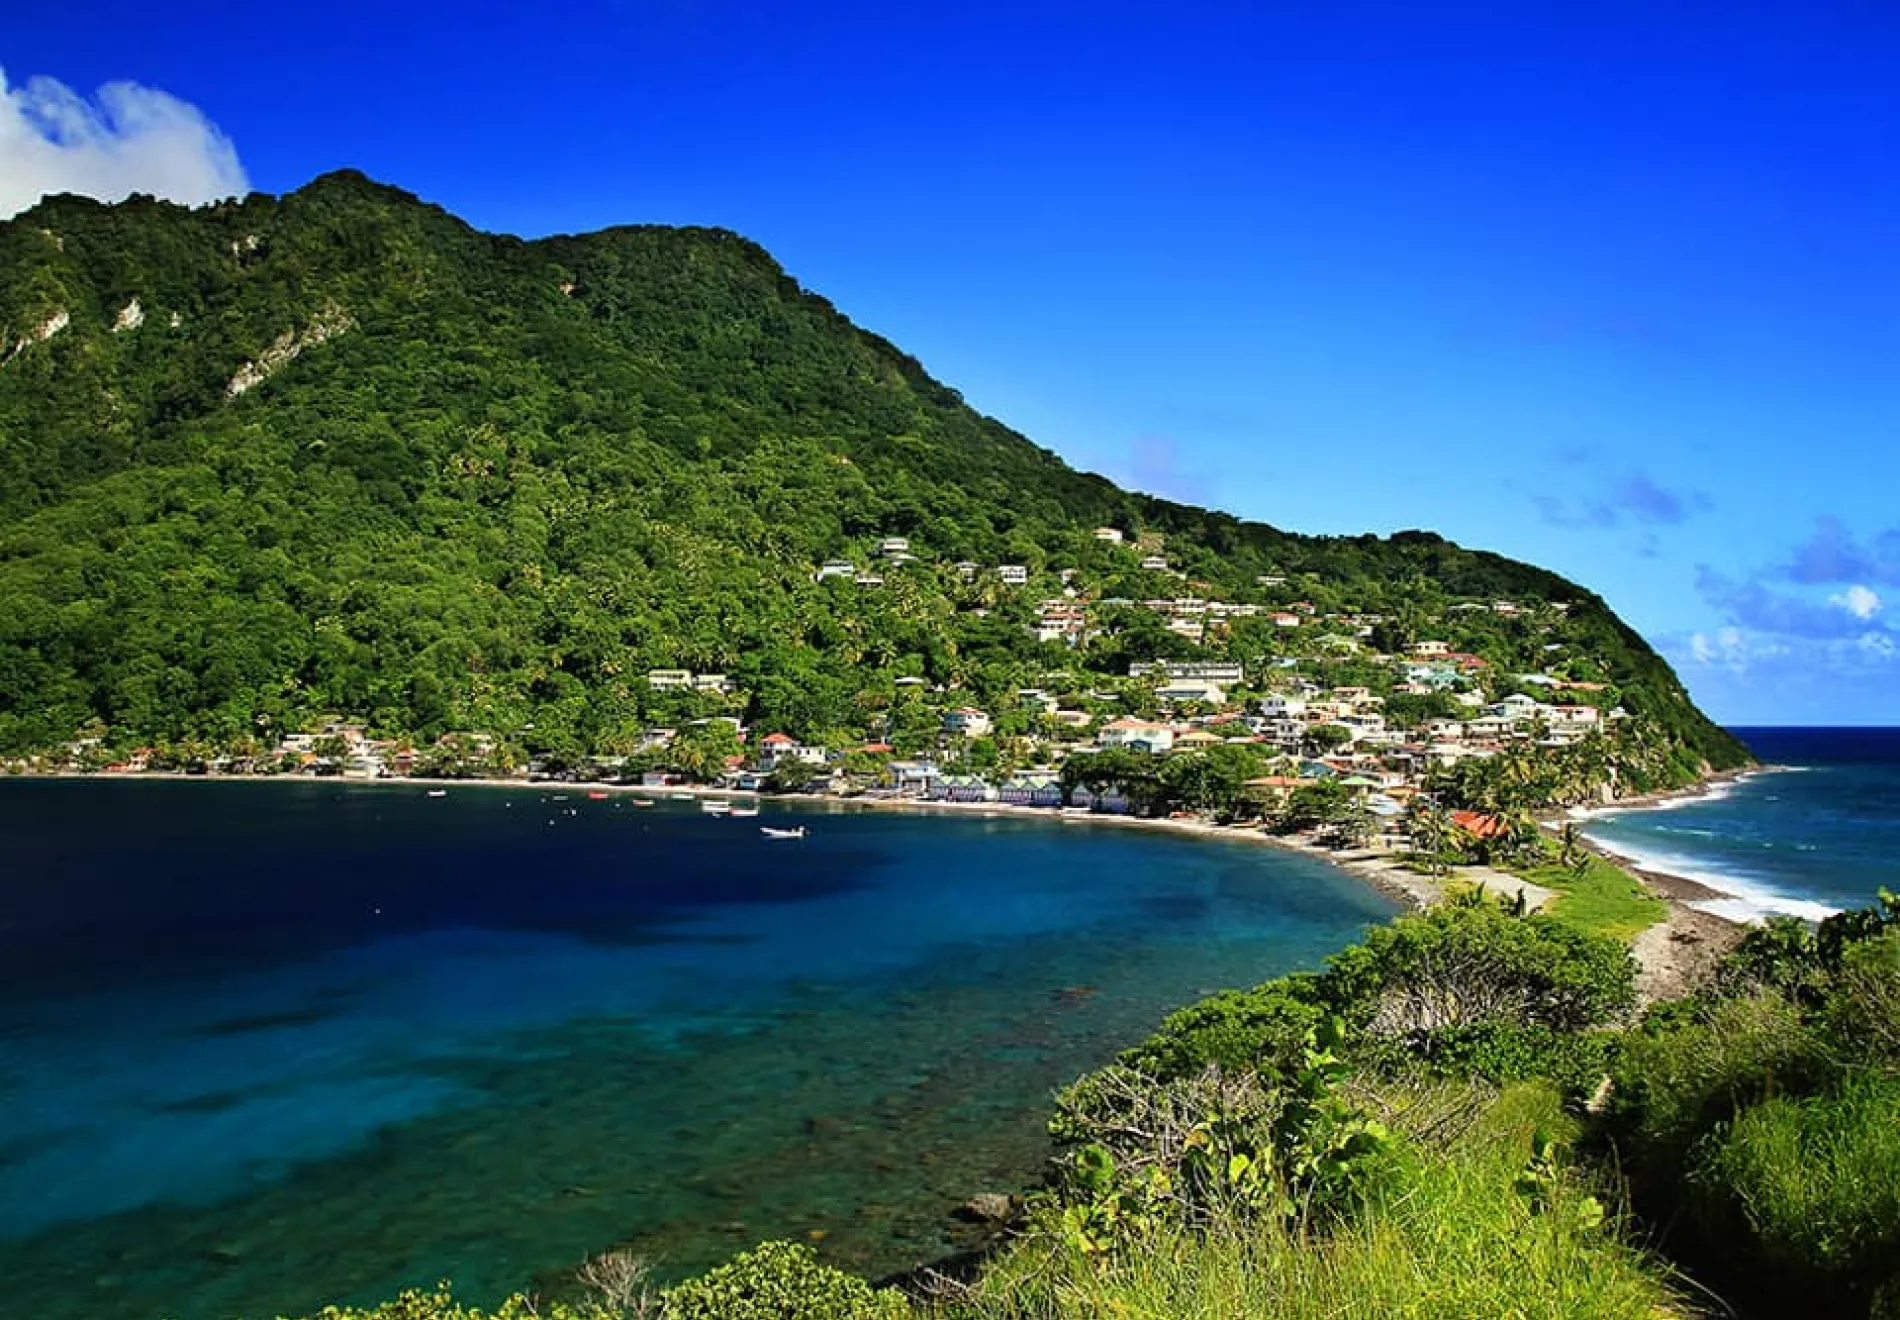 THE NORTHERN WINDWARD ISLANDS: Martinique, St. Lucia, Barbados